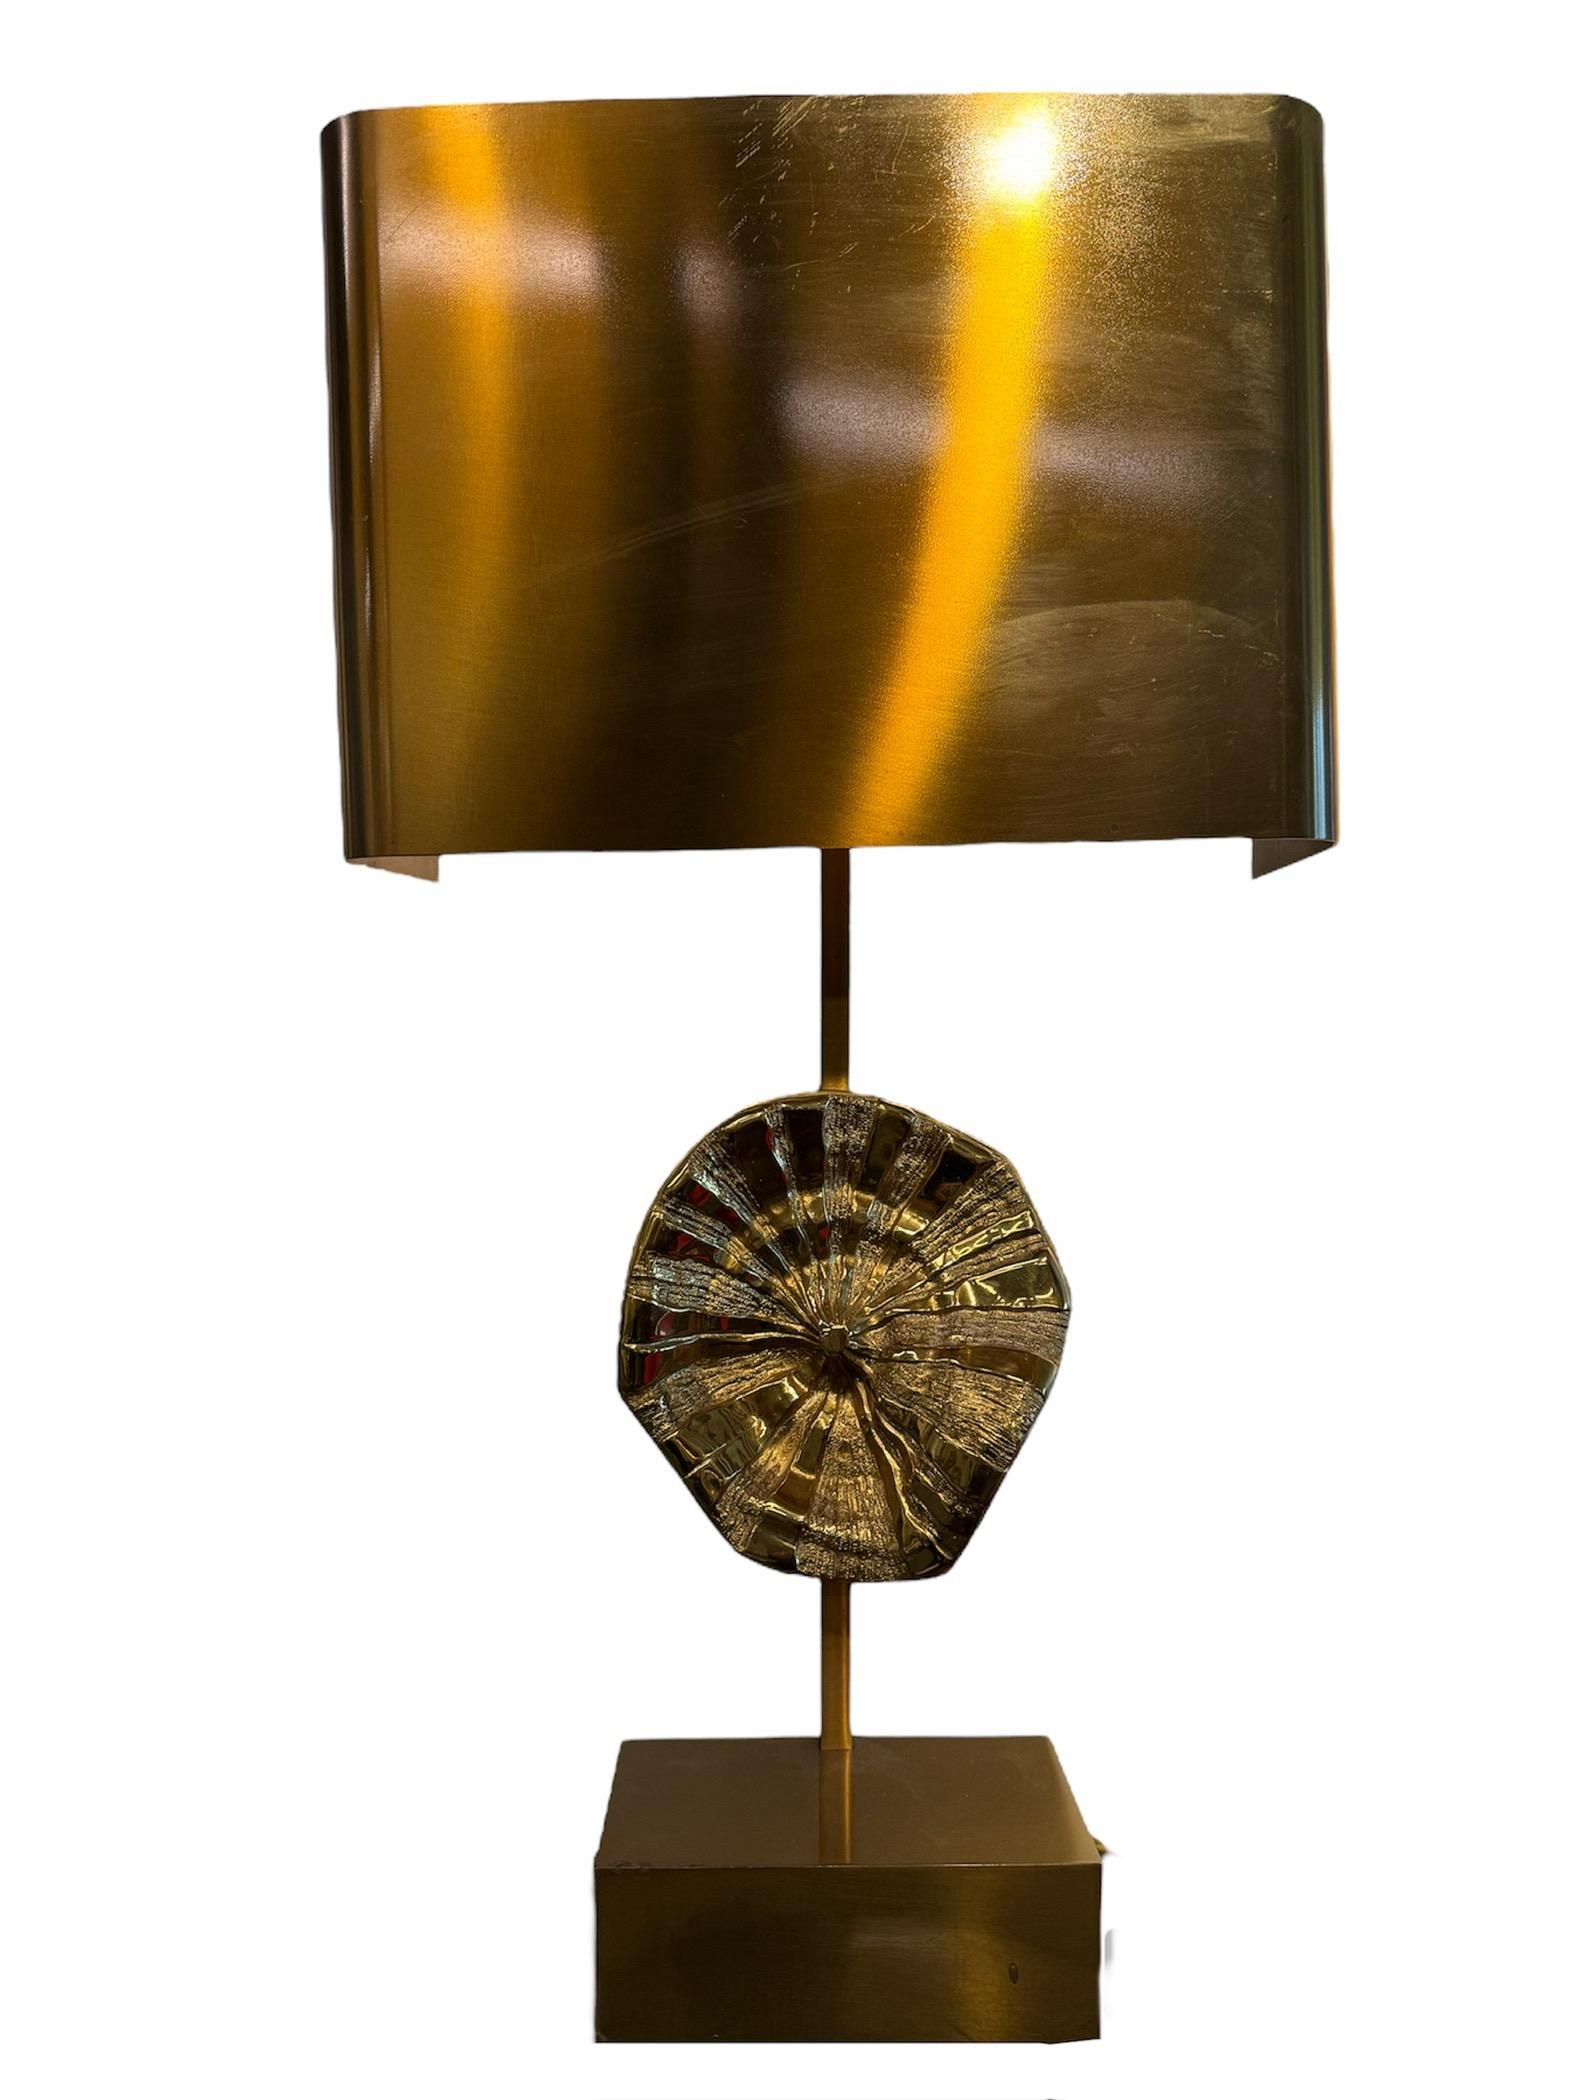 Maison Charles Bronze Desk Lamp with Central Flower Motif
This exquisite Maison Charles desk lamp seamlessly marries classic elegance with whimsical charm. Crafted by the renowned French lighting manufacturer, this piece is a testament to meticulous